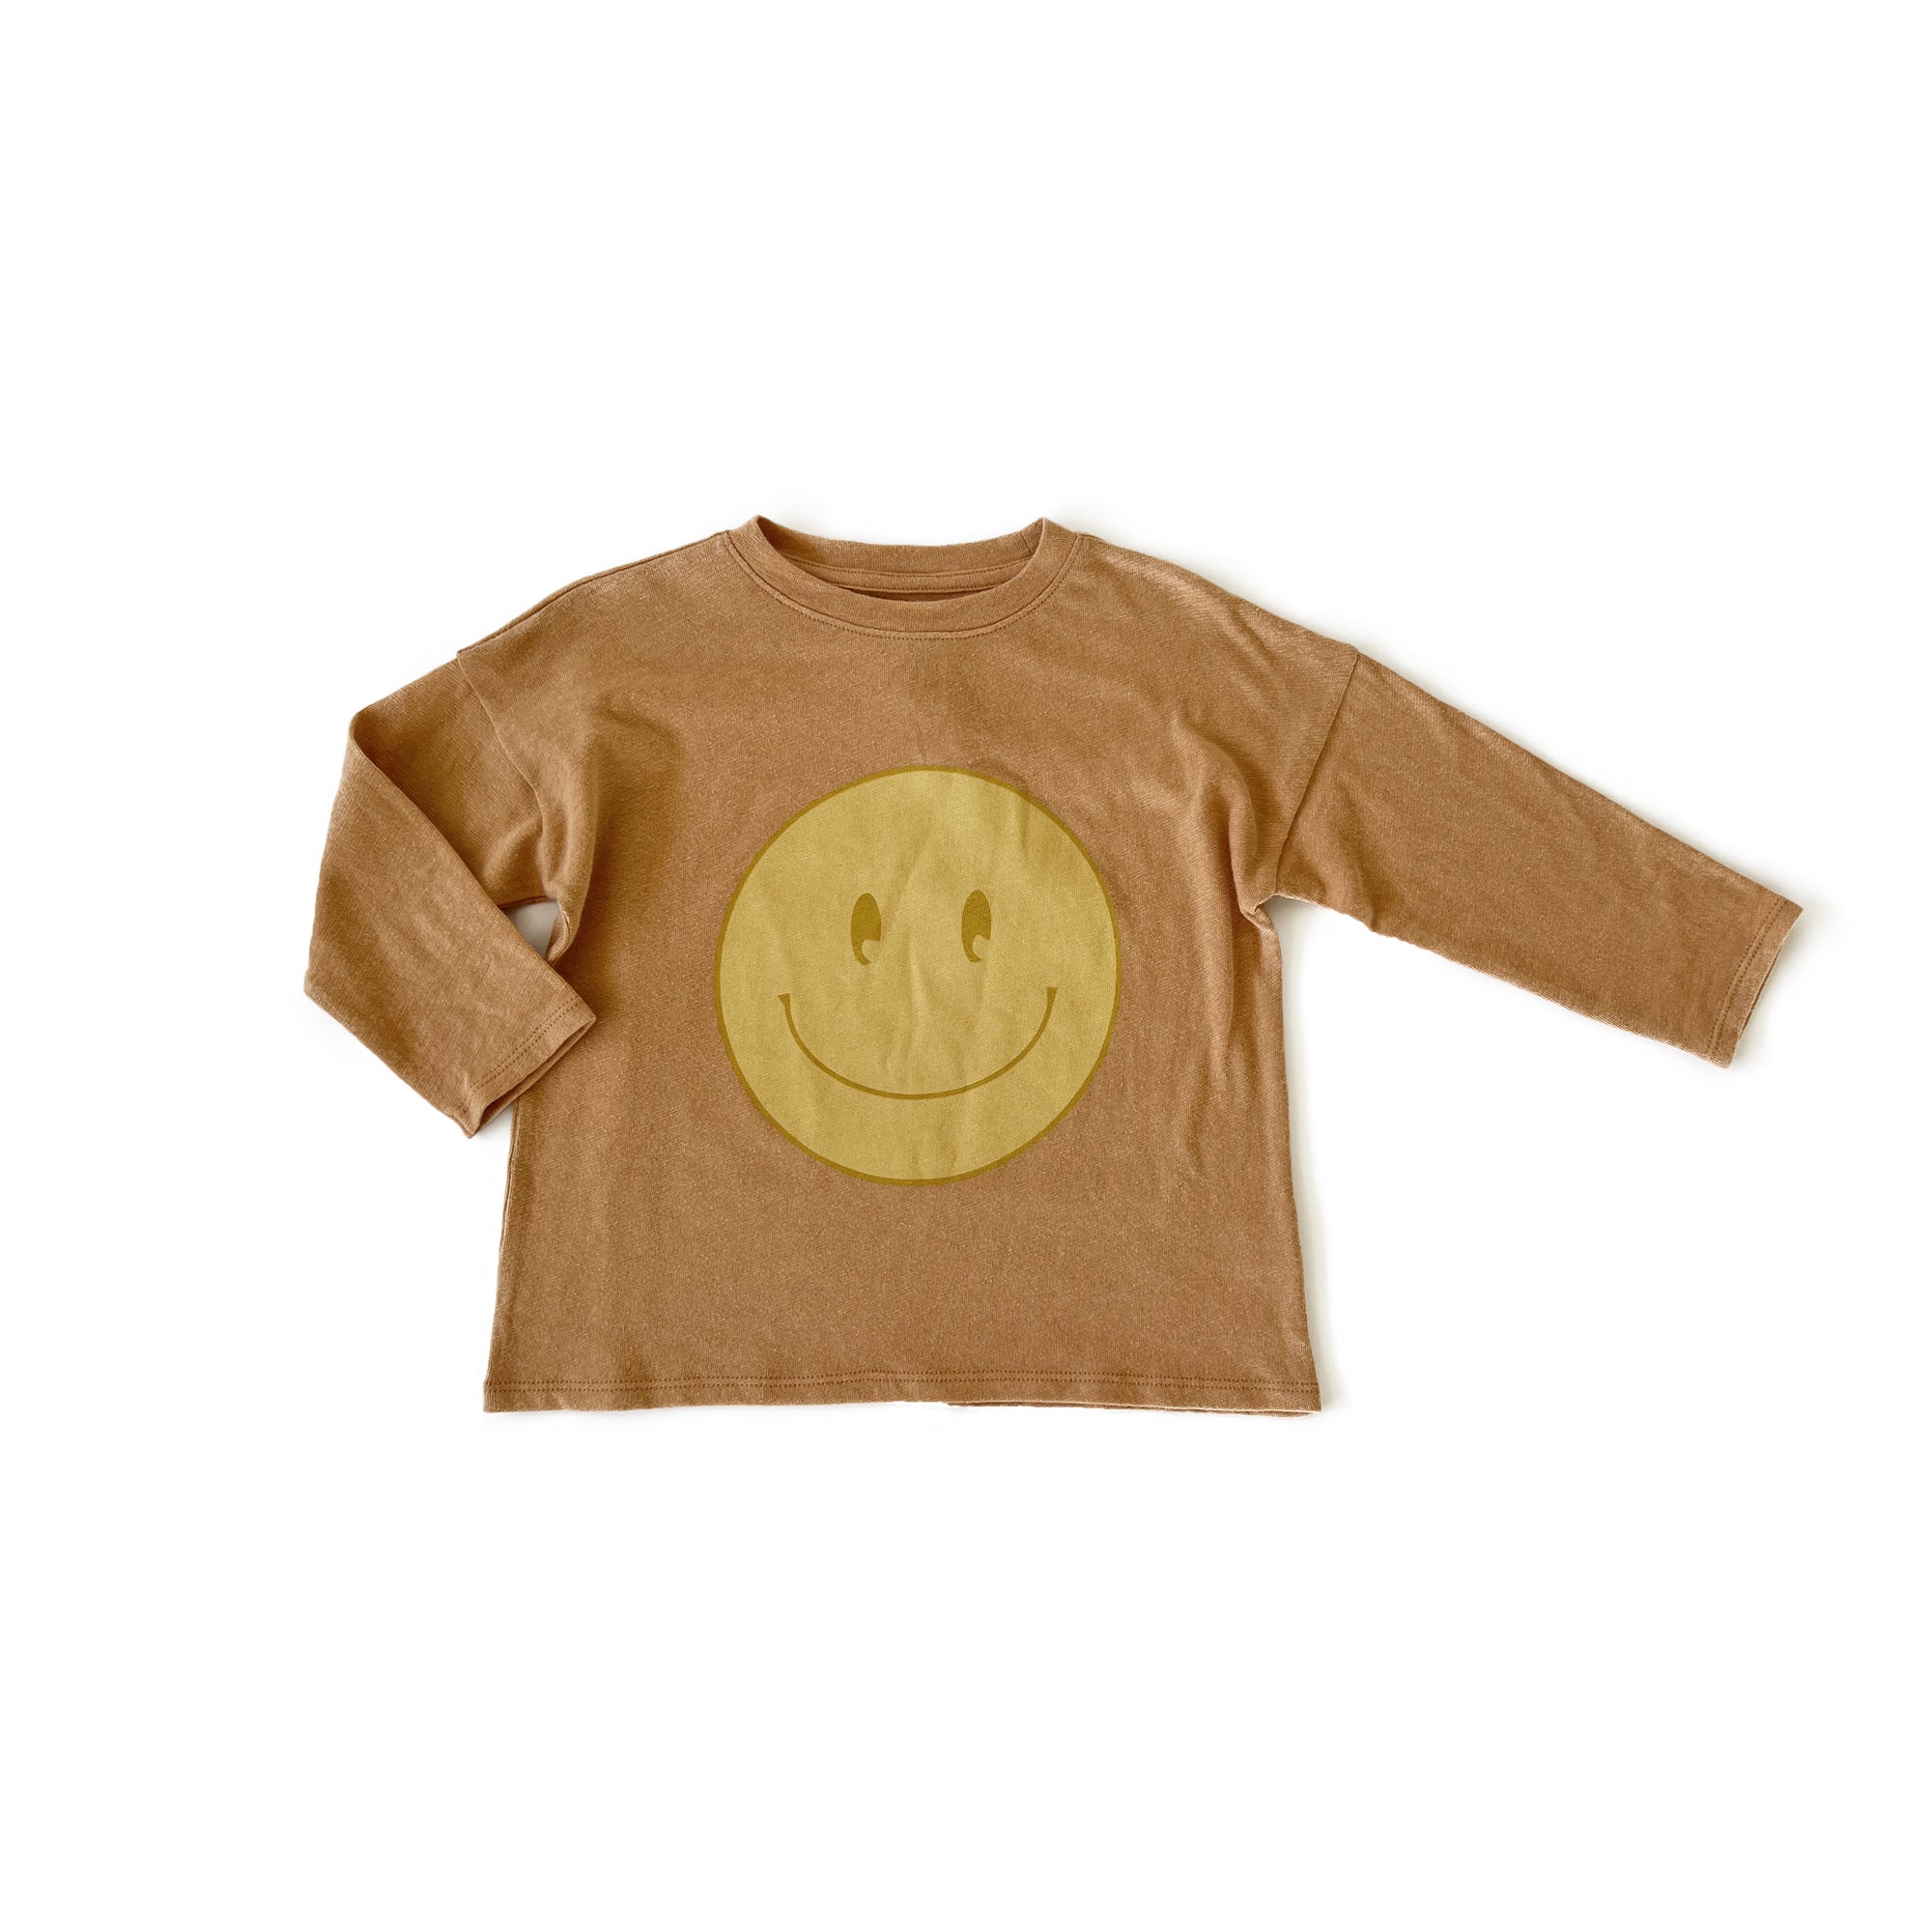 Smiley "Have a Nice Day" Top